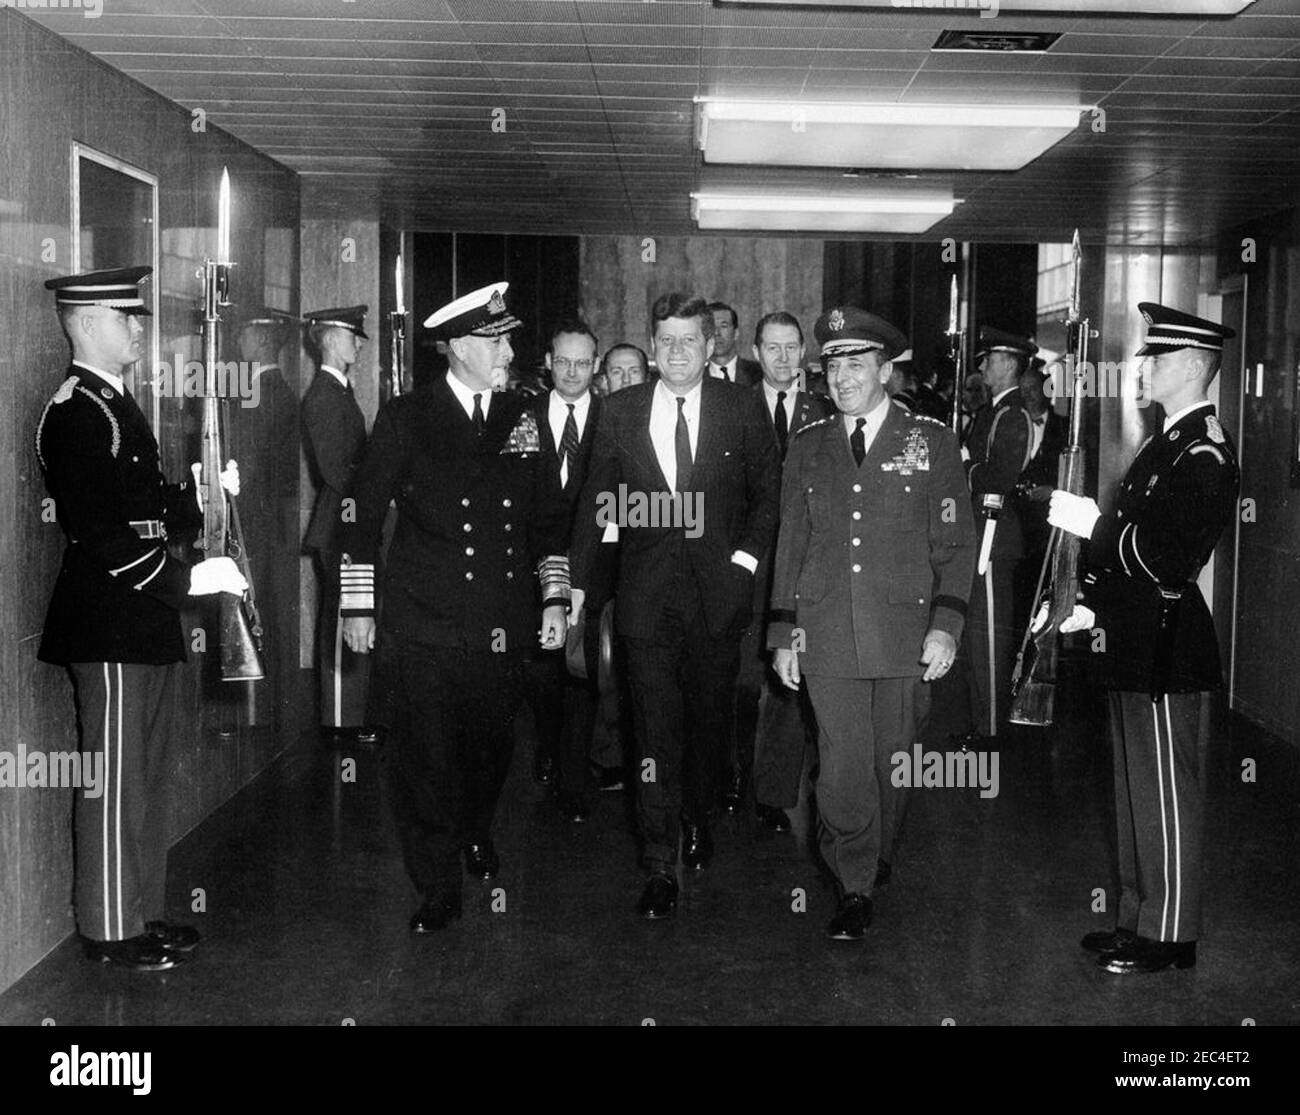 Address to the Chiefs of Staff of NATO (North Atlantic Treaty Organization) Nations, 10:03AM. President John F. Kennedy walks through a hallway of the State Department; the President delivered an address to the Chiefs of Staff of NATO (North Atlantic Treaty Organization) Nations. L-R: Two unidentified honor guard members; Chief of the Defense Staff of the British Armed Forces, Lord Louis Mountbatten, First Earl Mountbatten of Burma; Special Assistant to the President on Foreign Affairs, McGeorge Bundy; unidentified man (in back); President Kennedy; Kennedy family friend, Charles Spalding (face Stock Photo